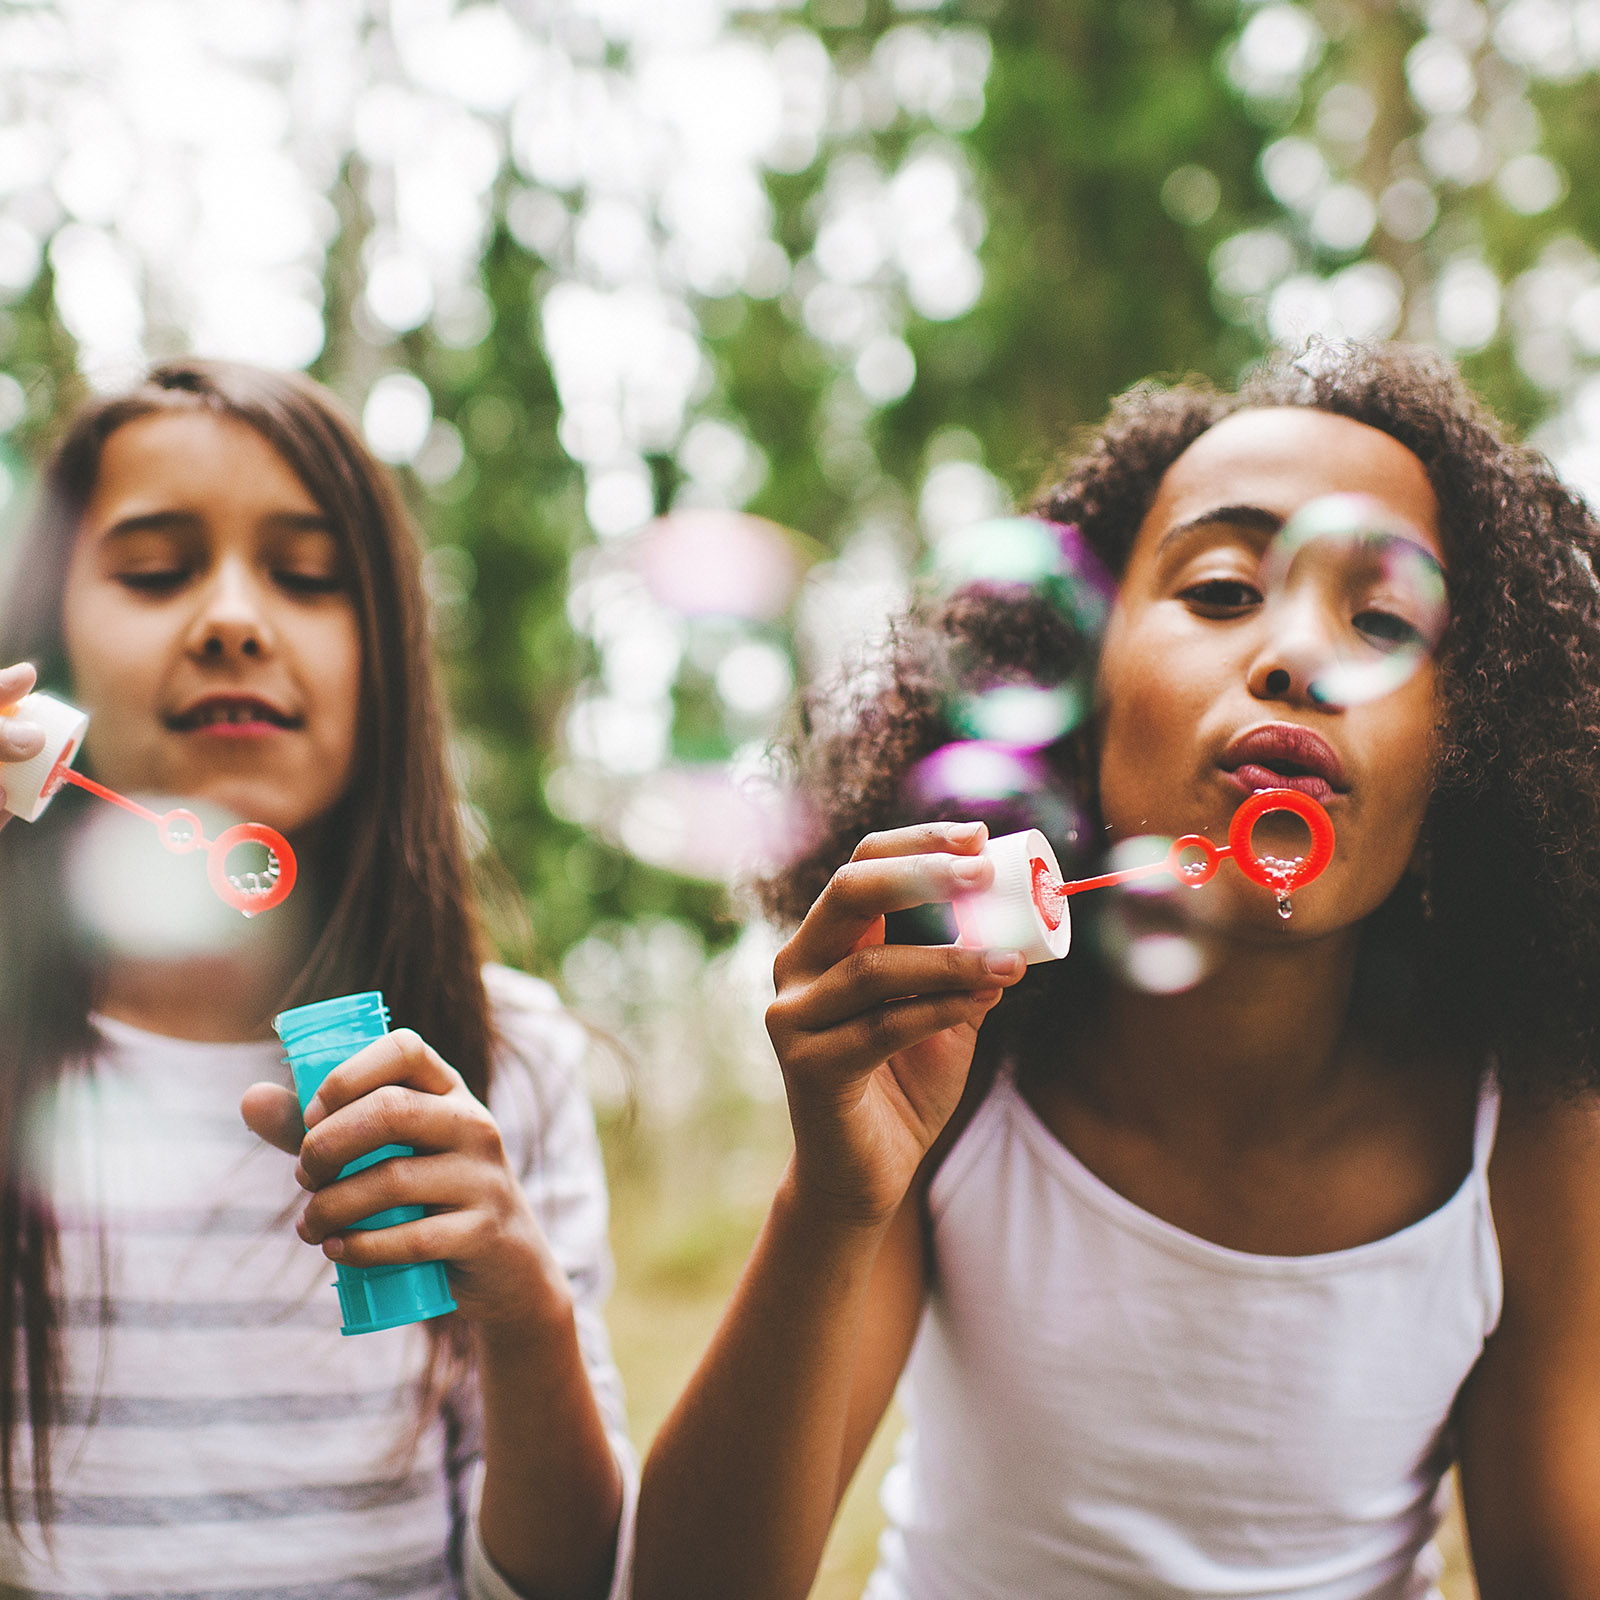 Two young girls blow bubbles outside